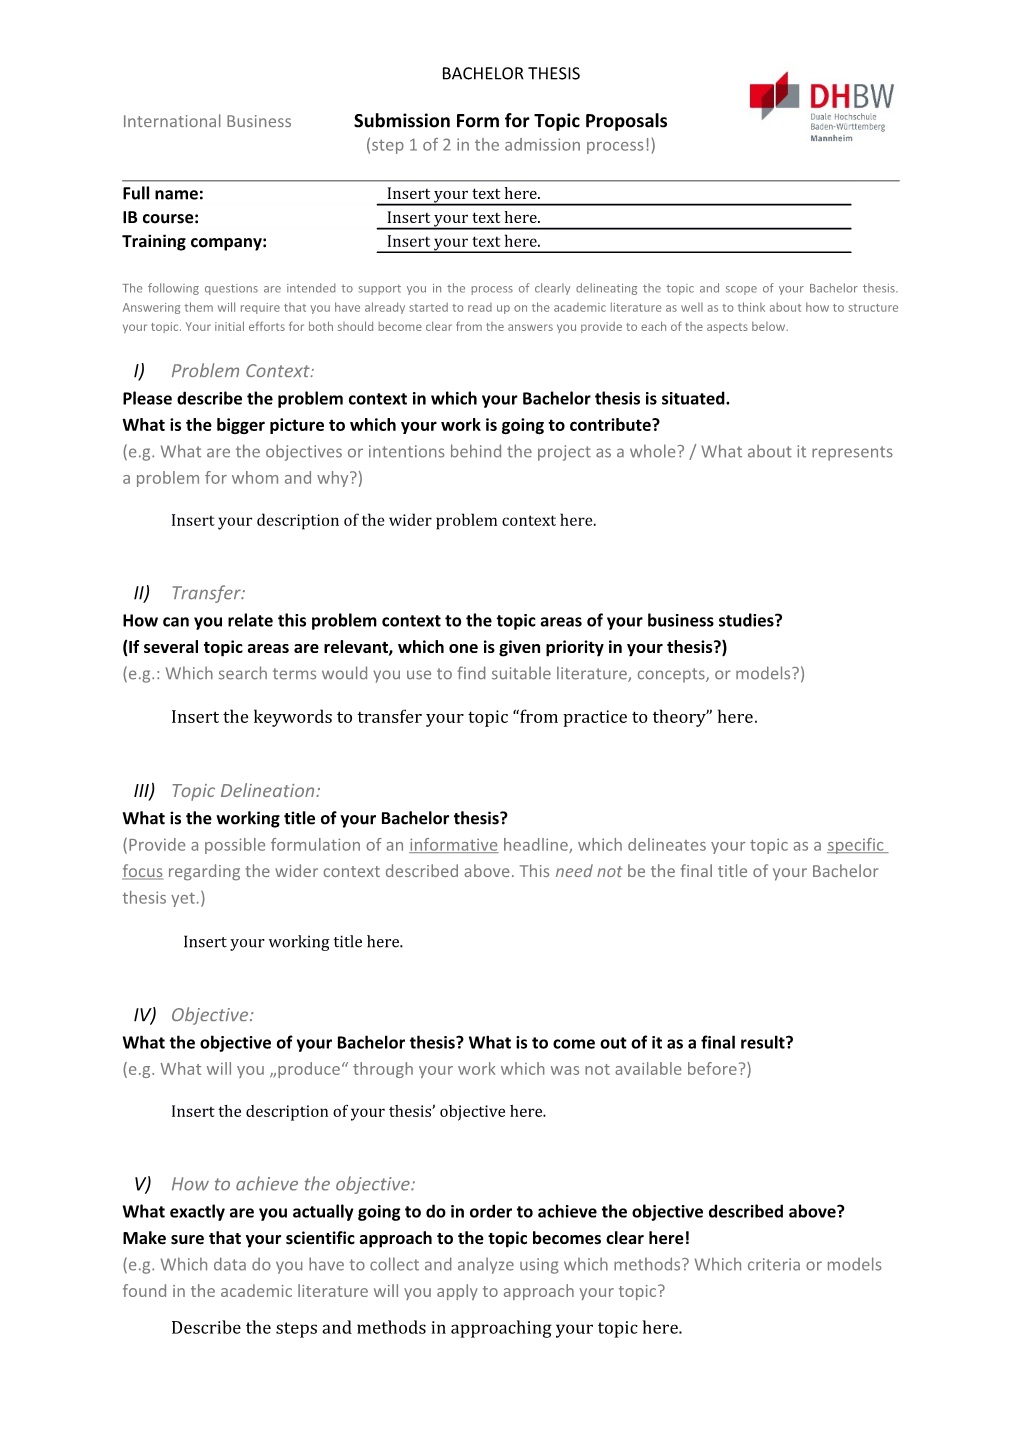 International Business Submission Form for Topic Proposals